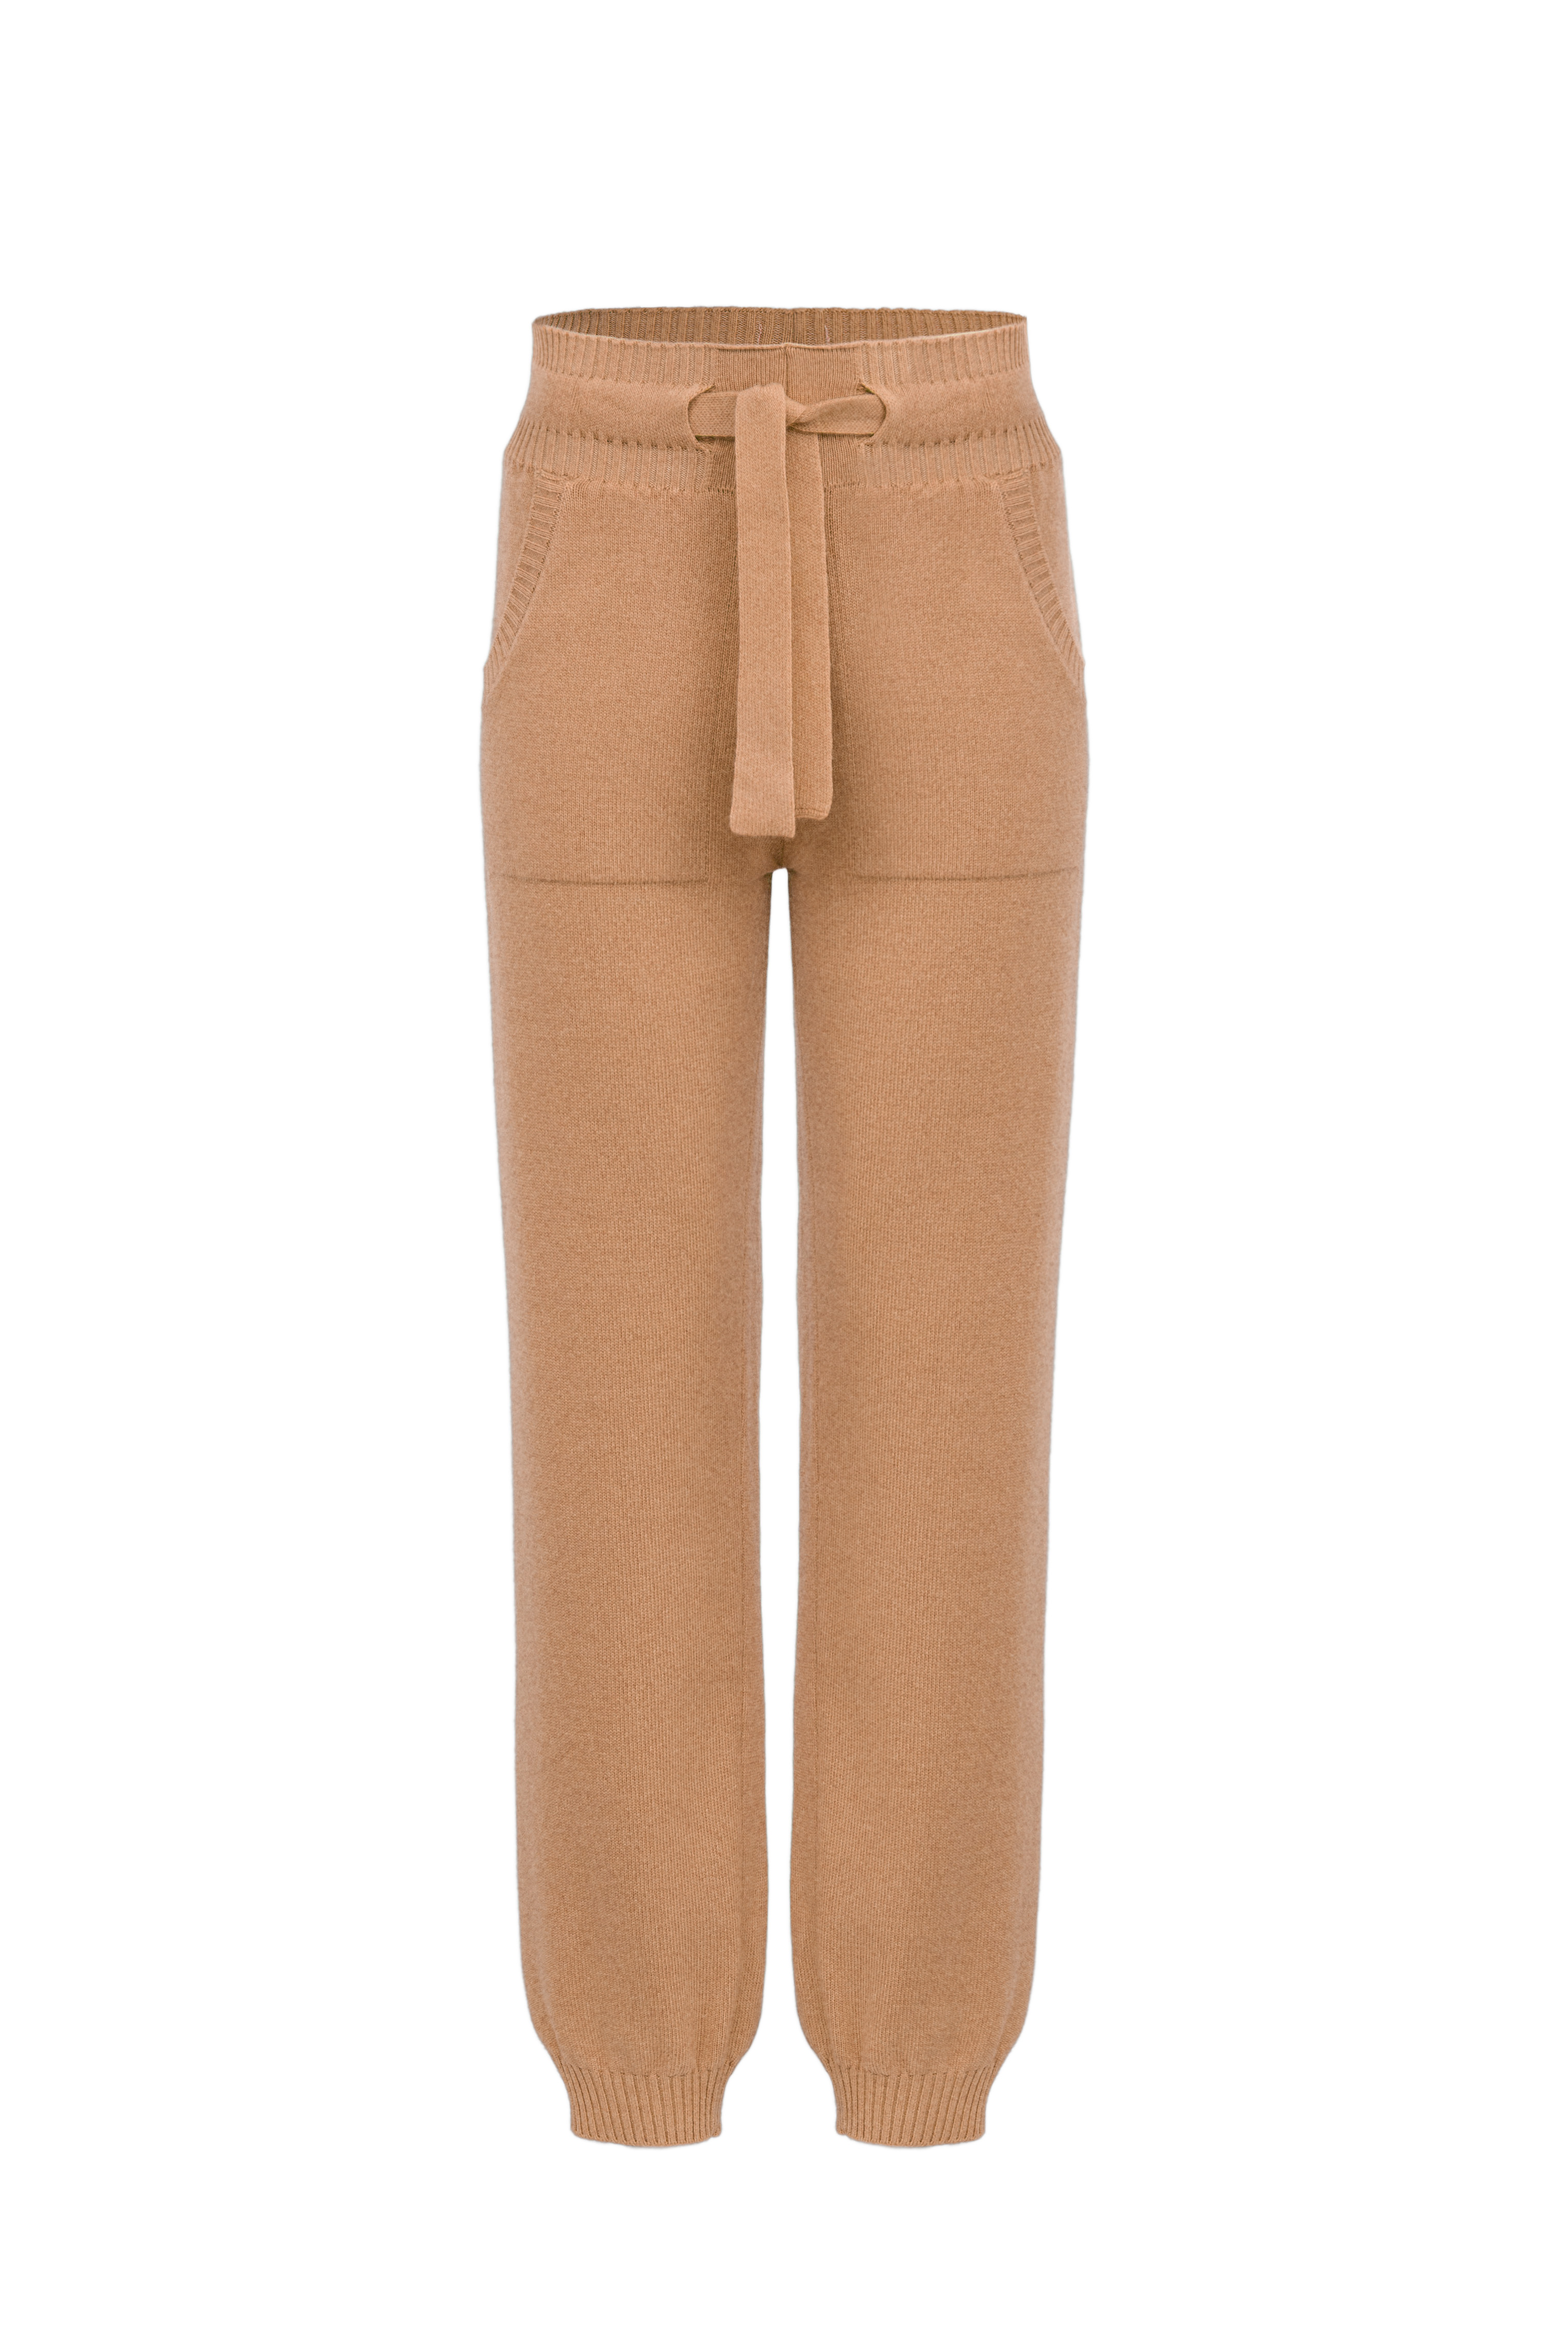 Trousers 3161-128 Camel from BRUSNiKA